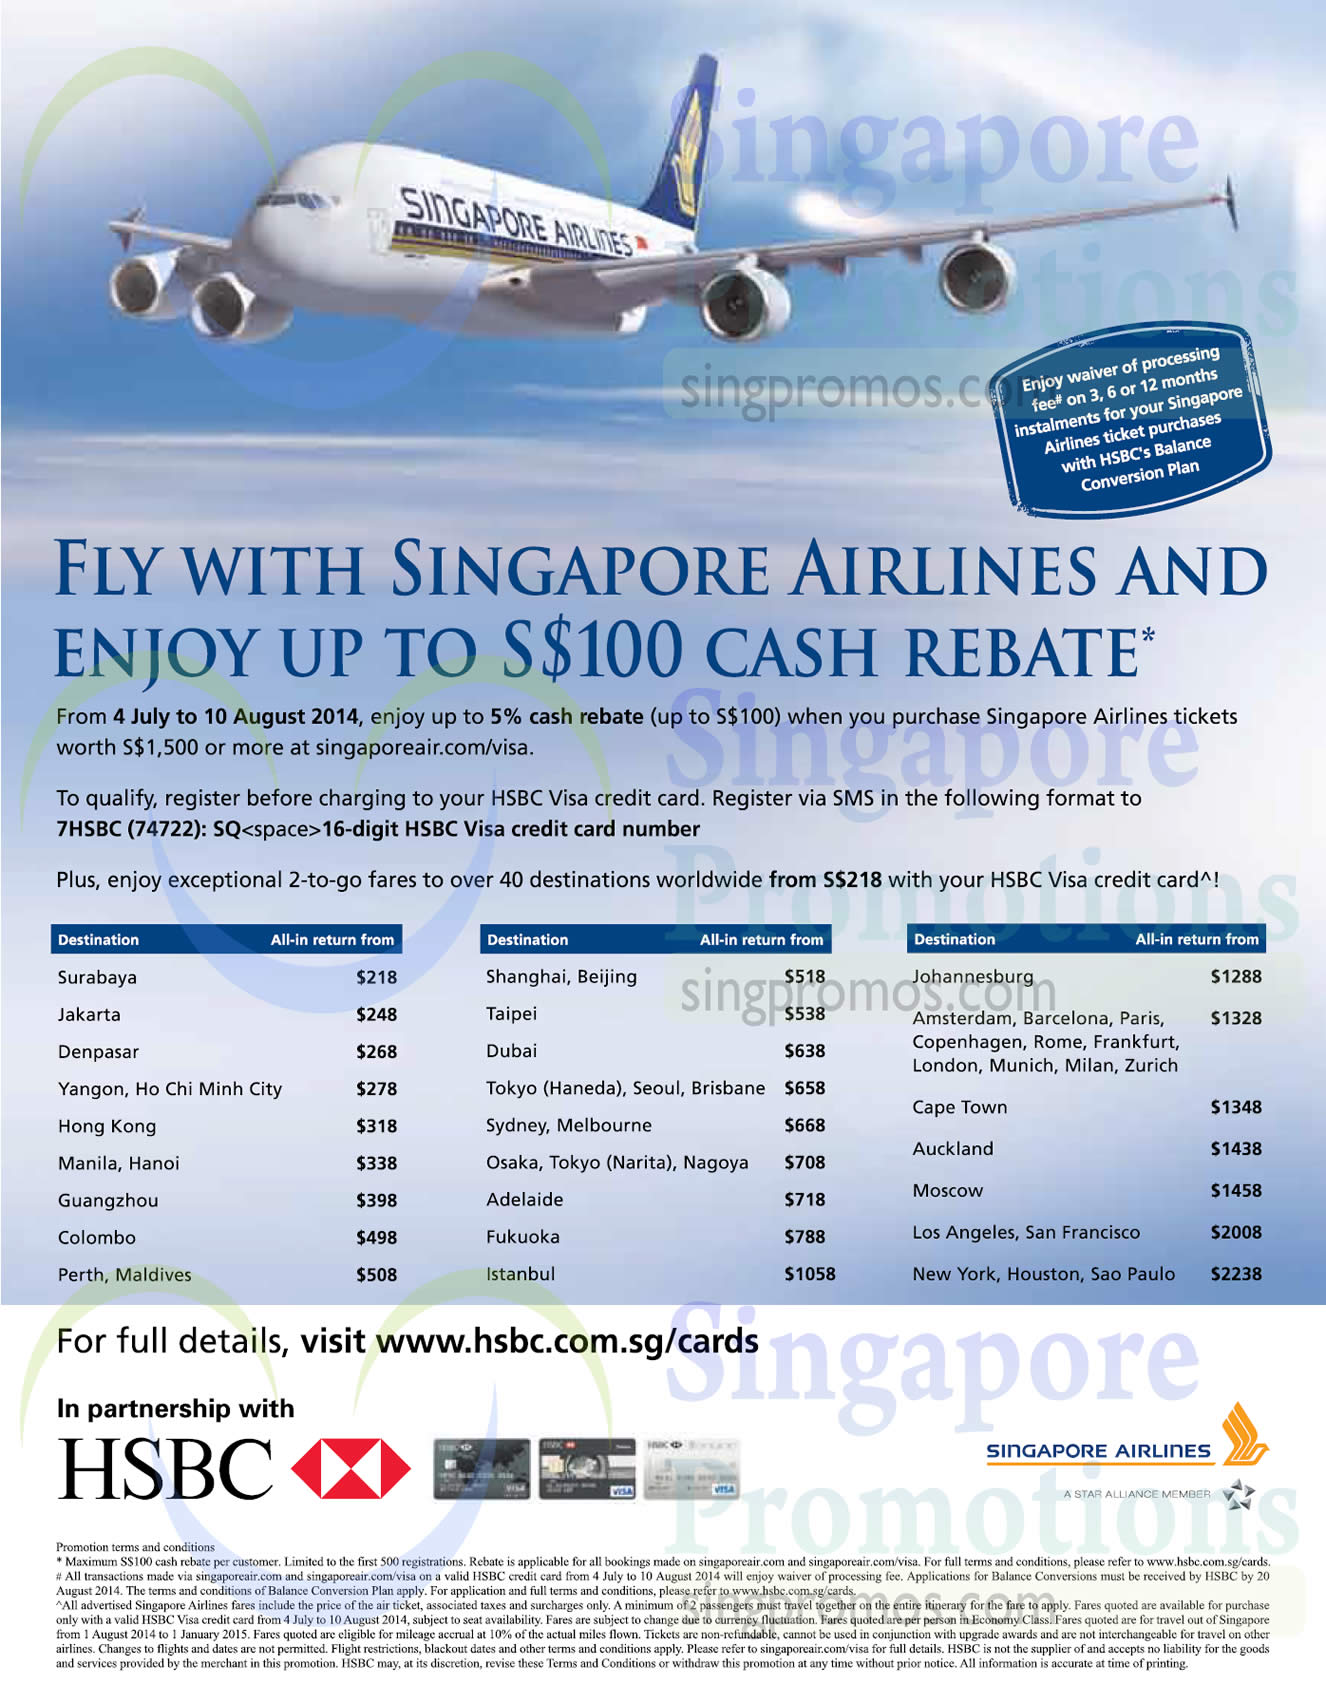 Singapore Airlines Up To 100 Cash Rebate For HSBC Visa Cardmembers 11 